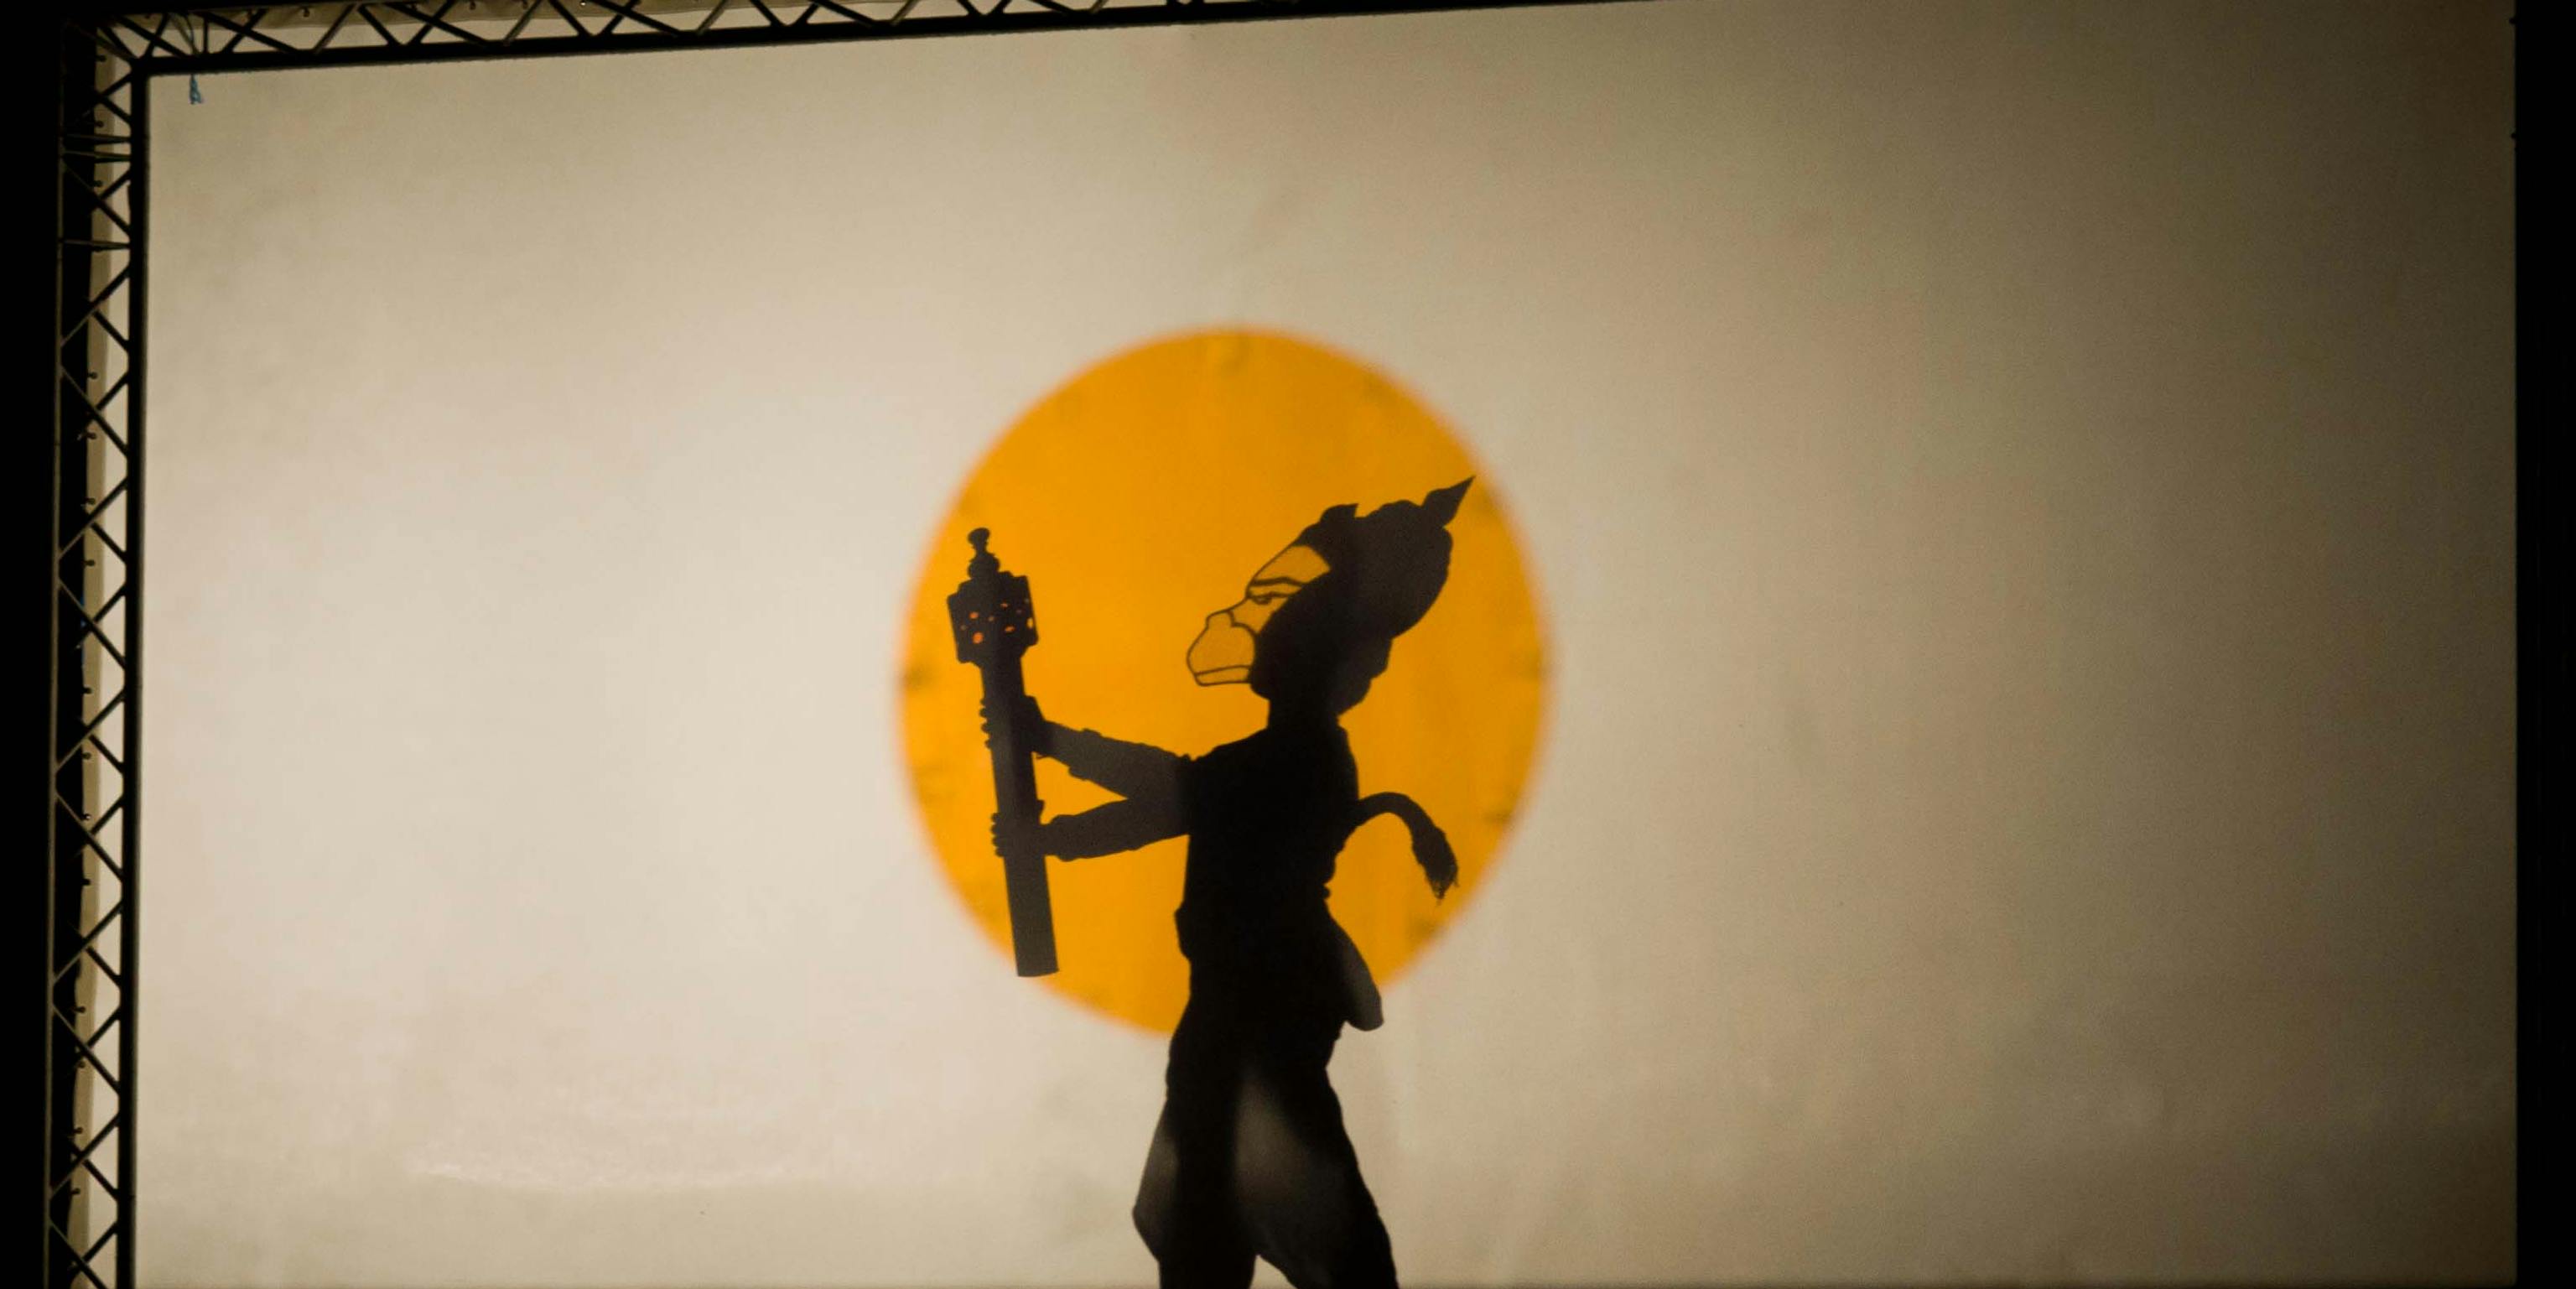 A shadow puppet of a monkey against a yellow circle